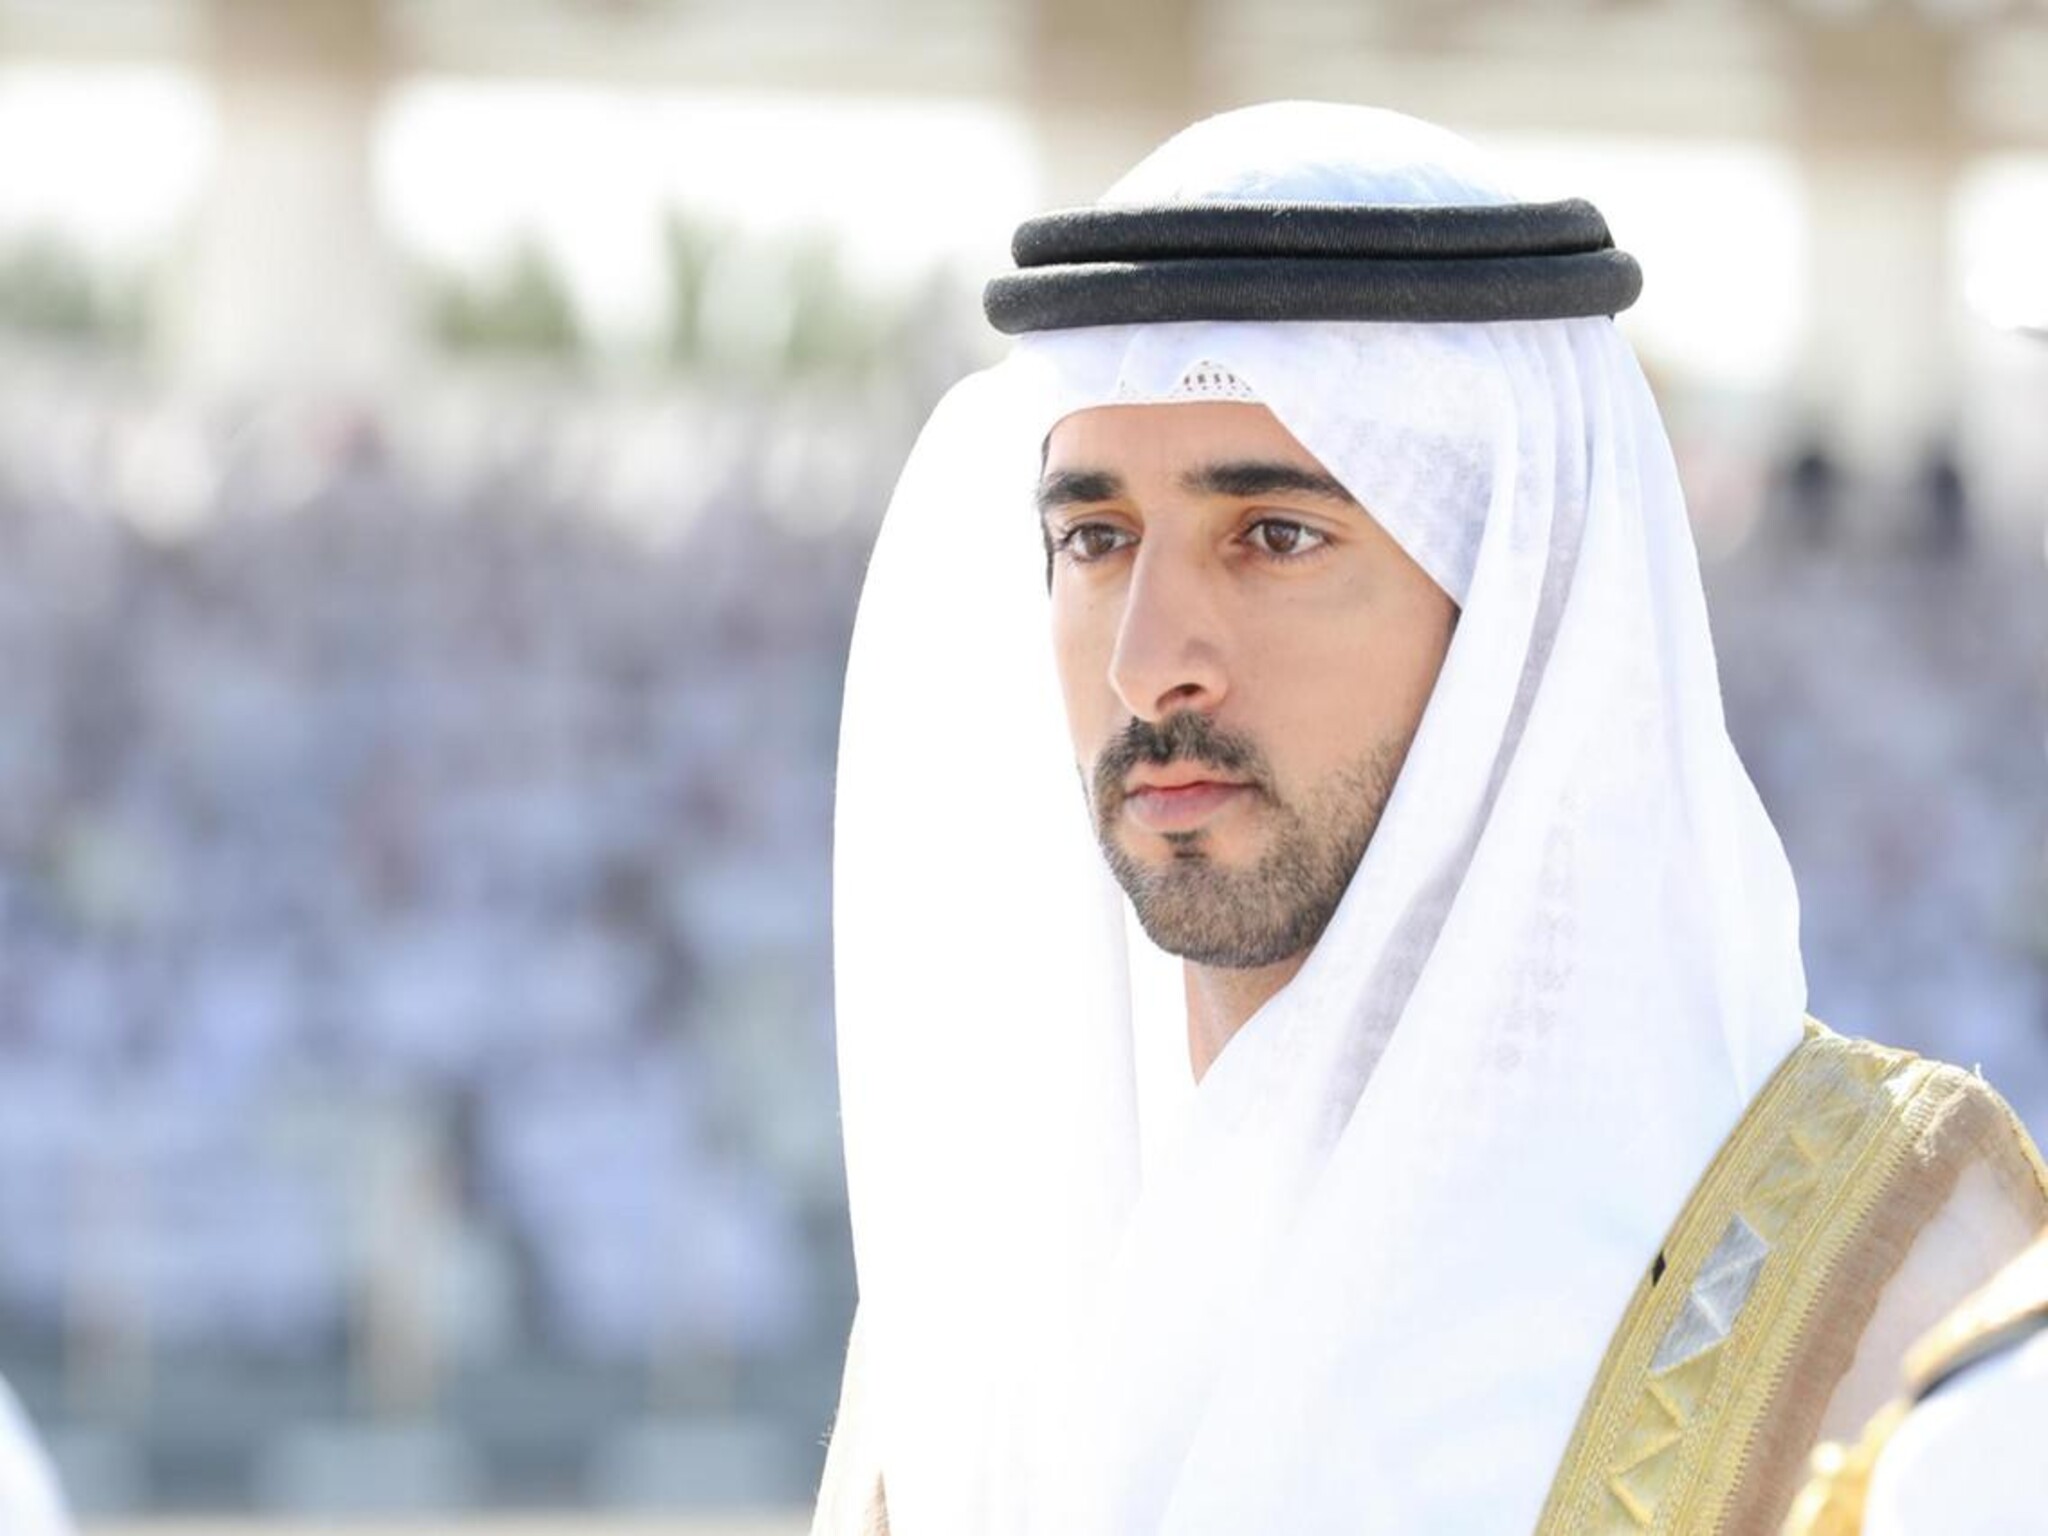 Sheikh Hamdan announced measures to support those affected by the rain in Dubai